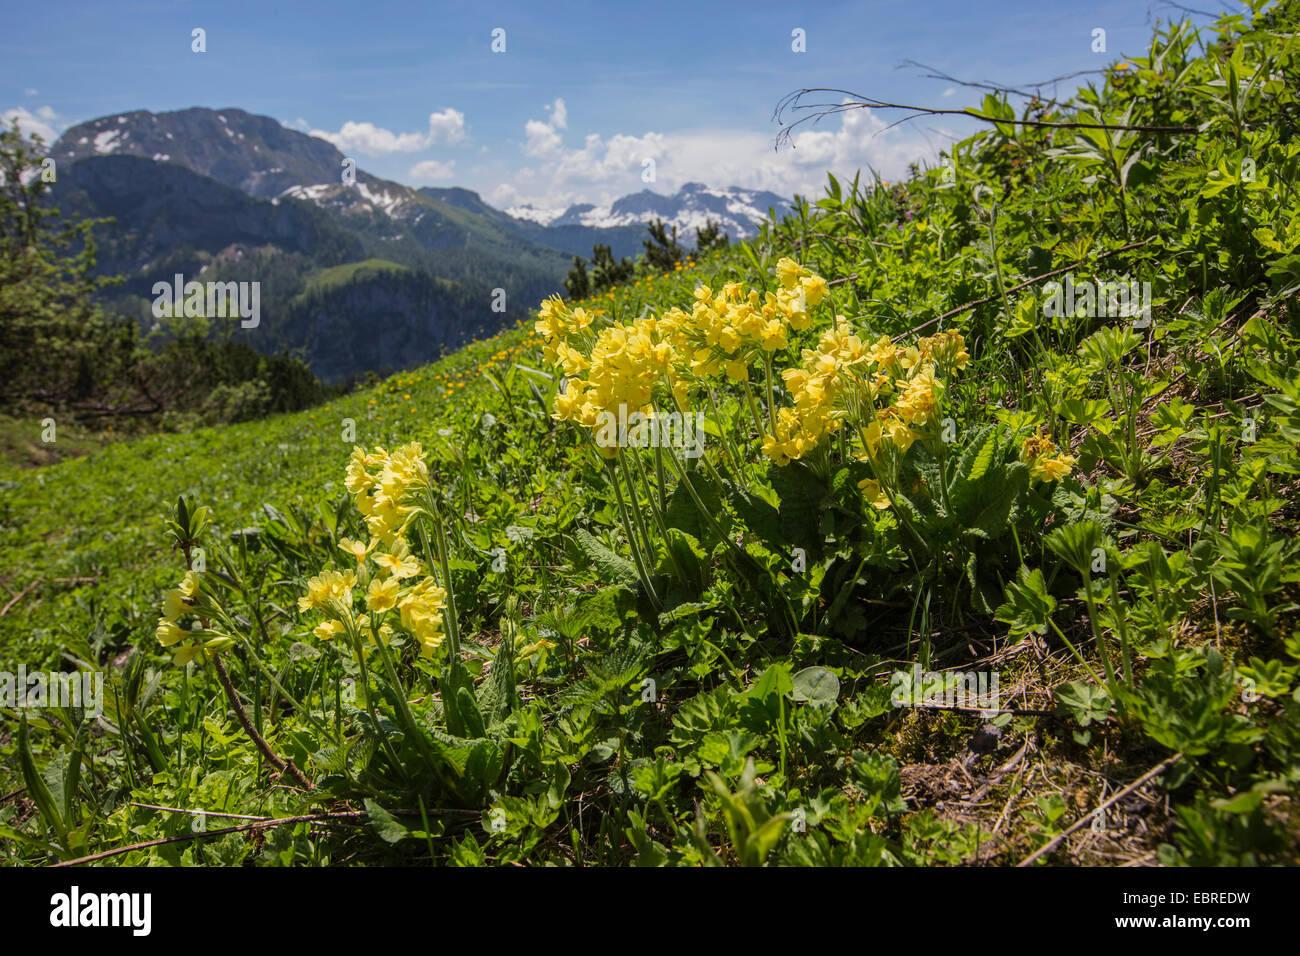 True oxlip (Primula elatior), flowering at mountainside with alps in the background, Germany, Bavaria, Jenner Stock Photo